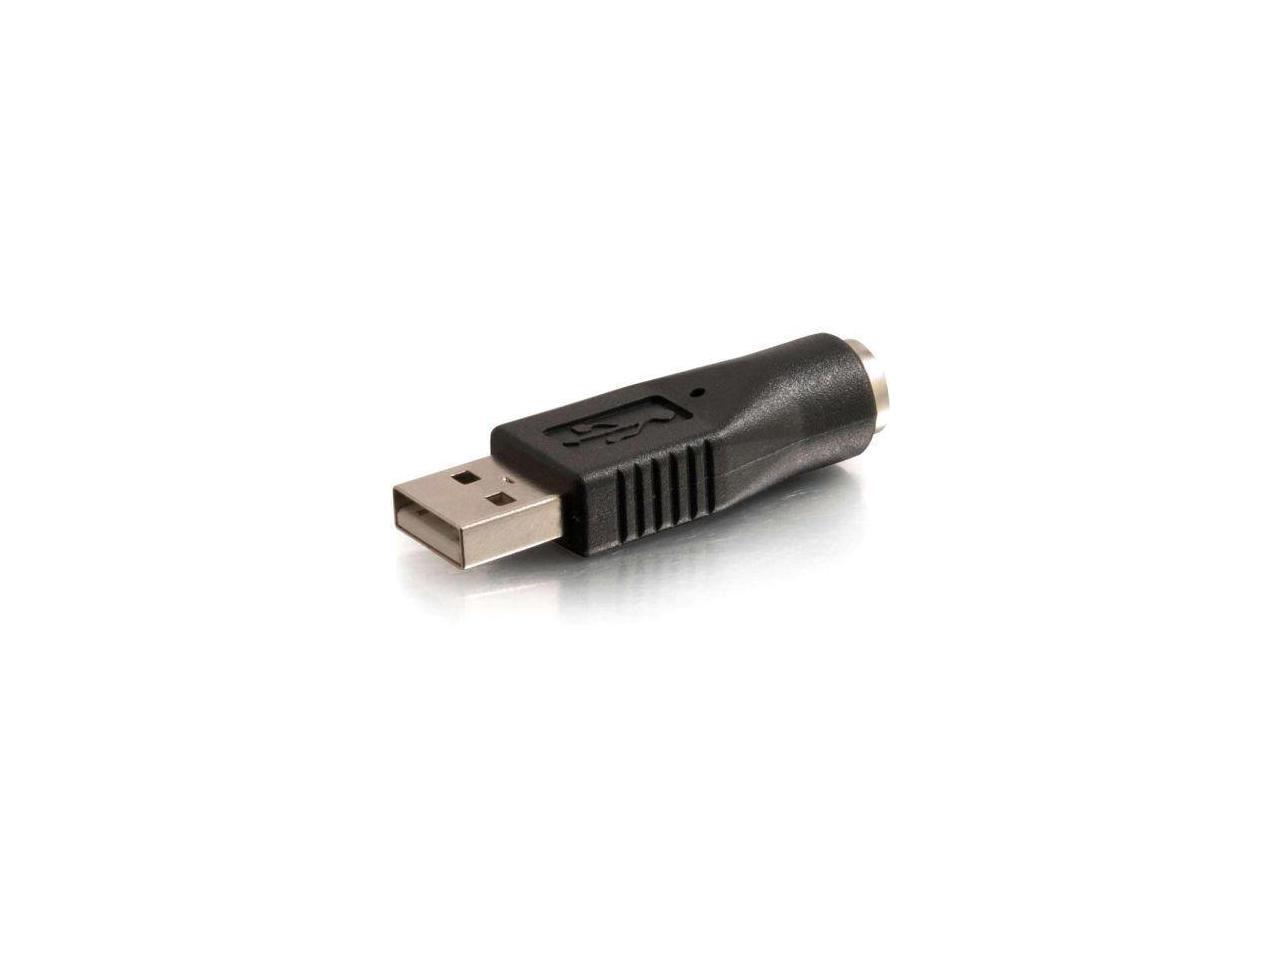 C2G 27277 USB Male to PS2 Female Adapter